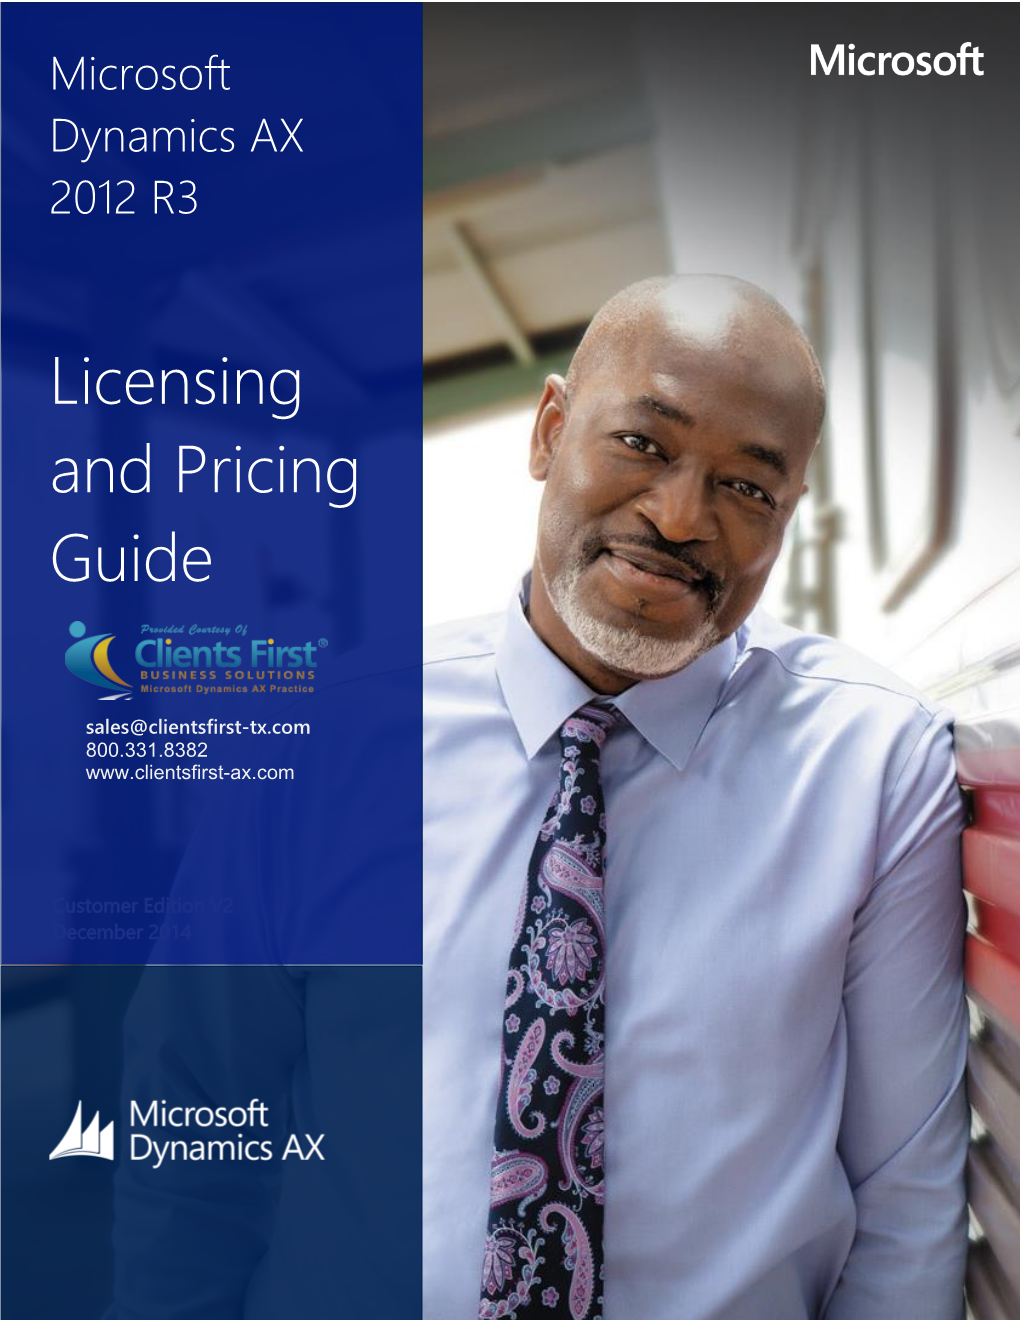 Microsoft Dynamics AX 2012 R3 Licensing and Pricing Guide